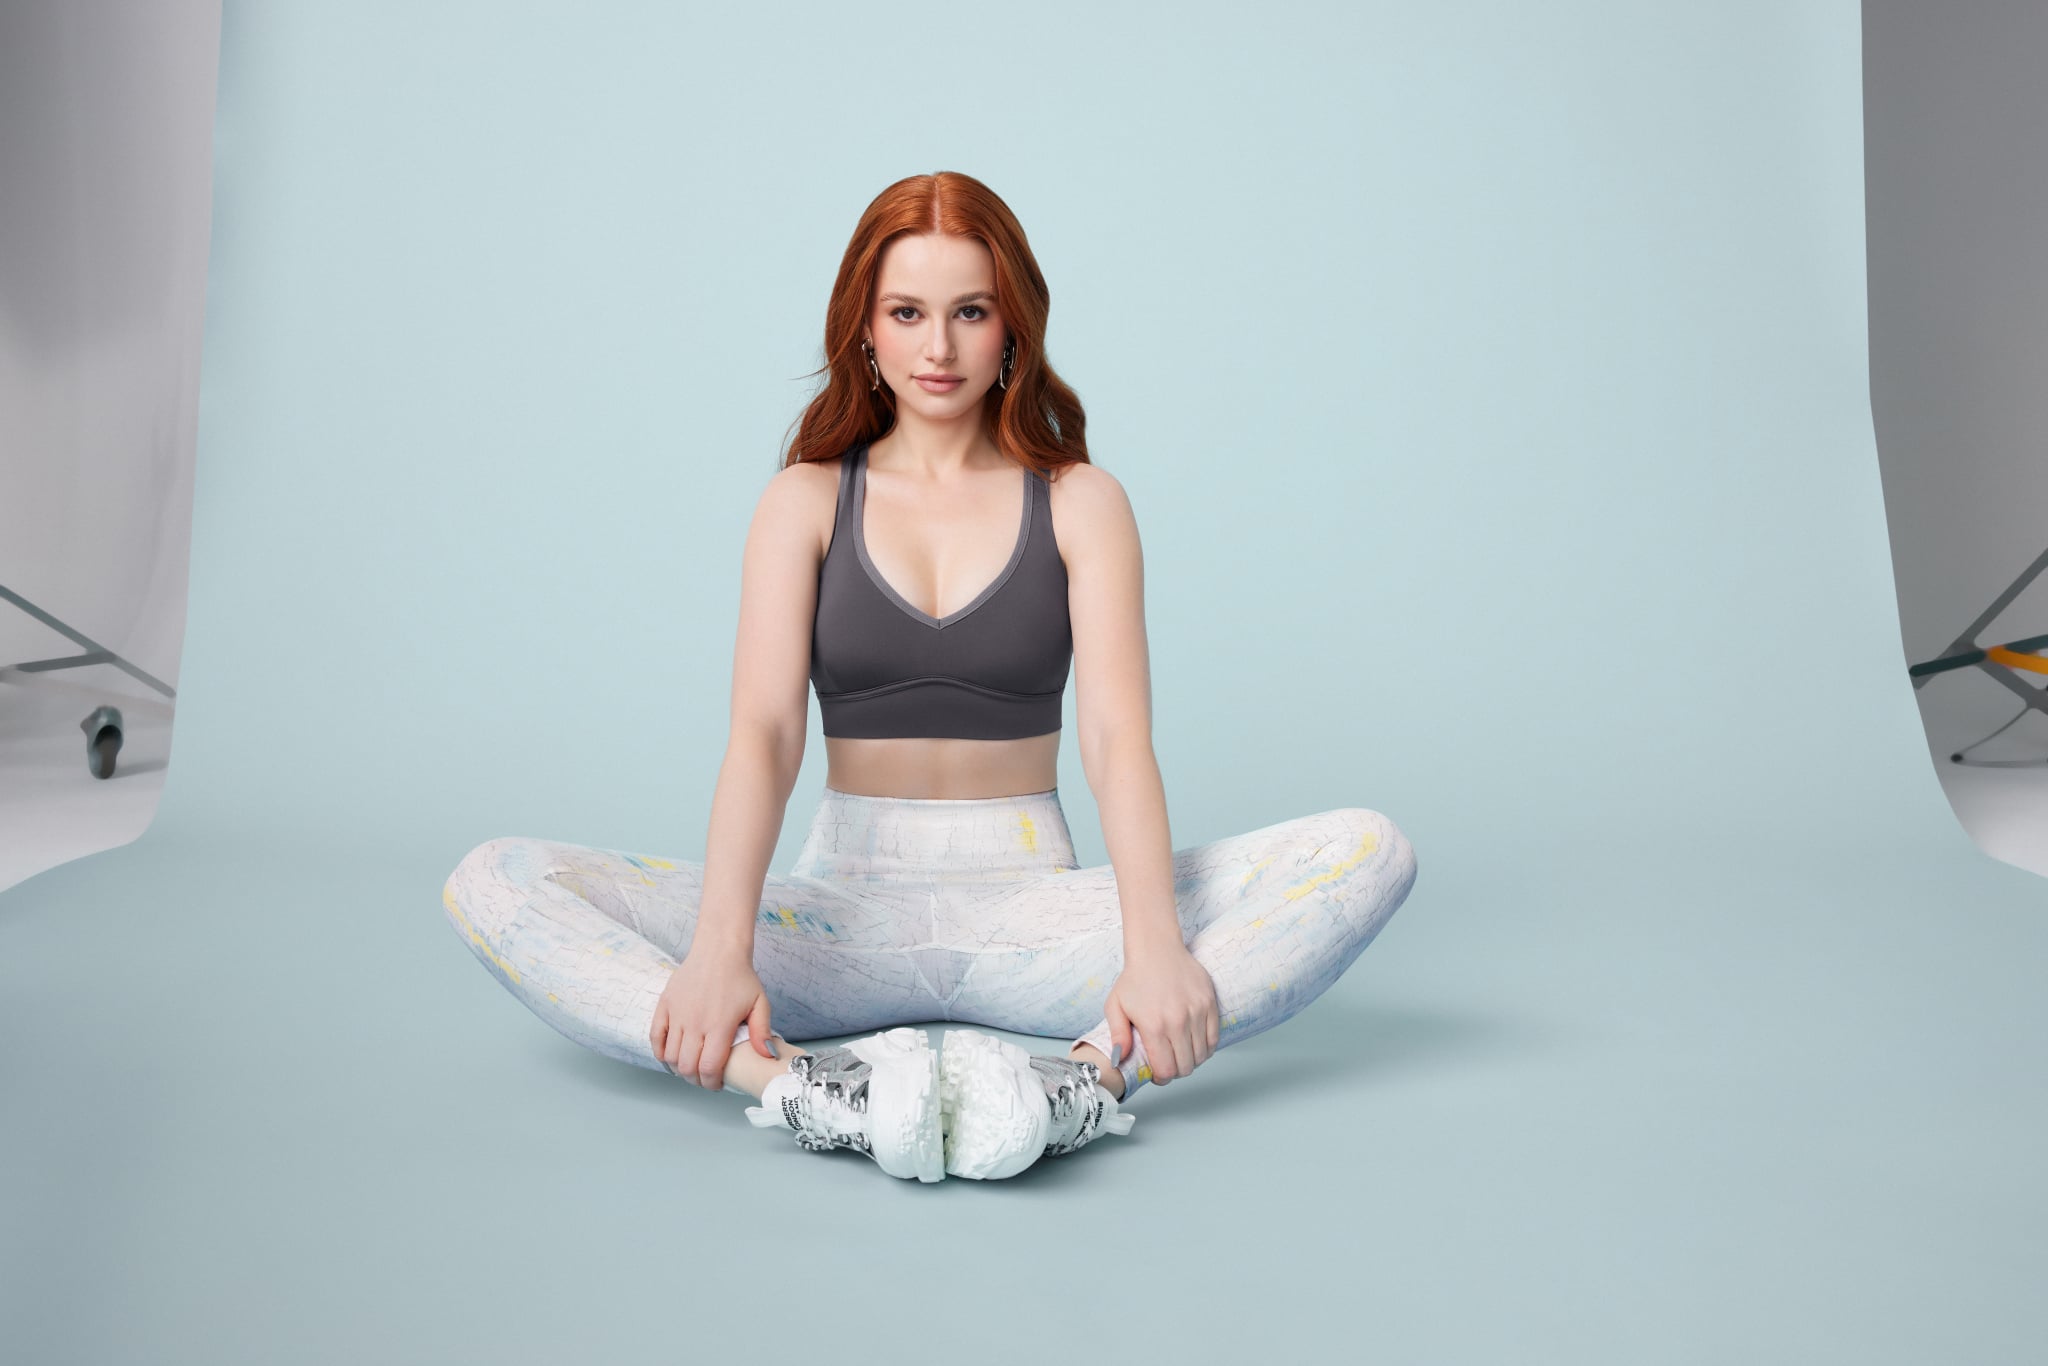 Designed by Madelaine. Made by Fabletics.